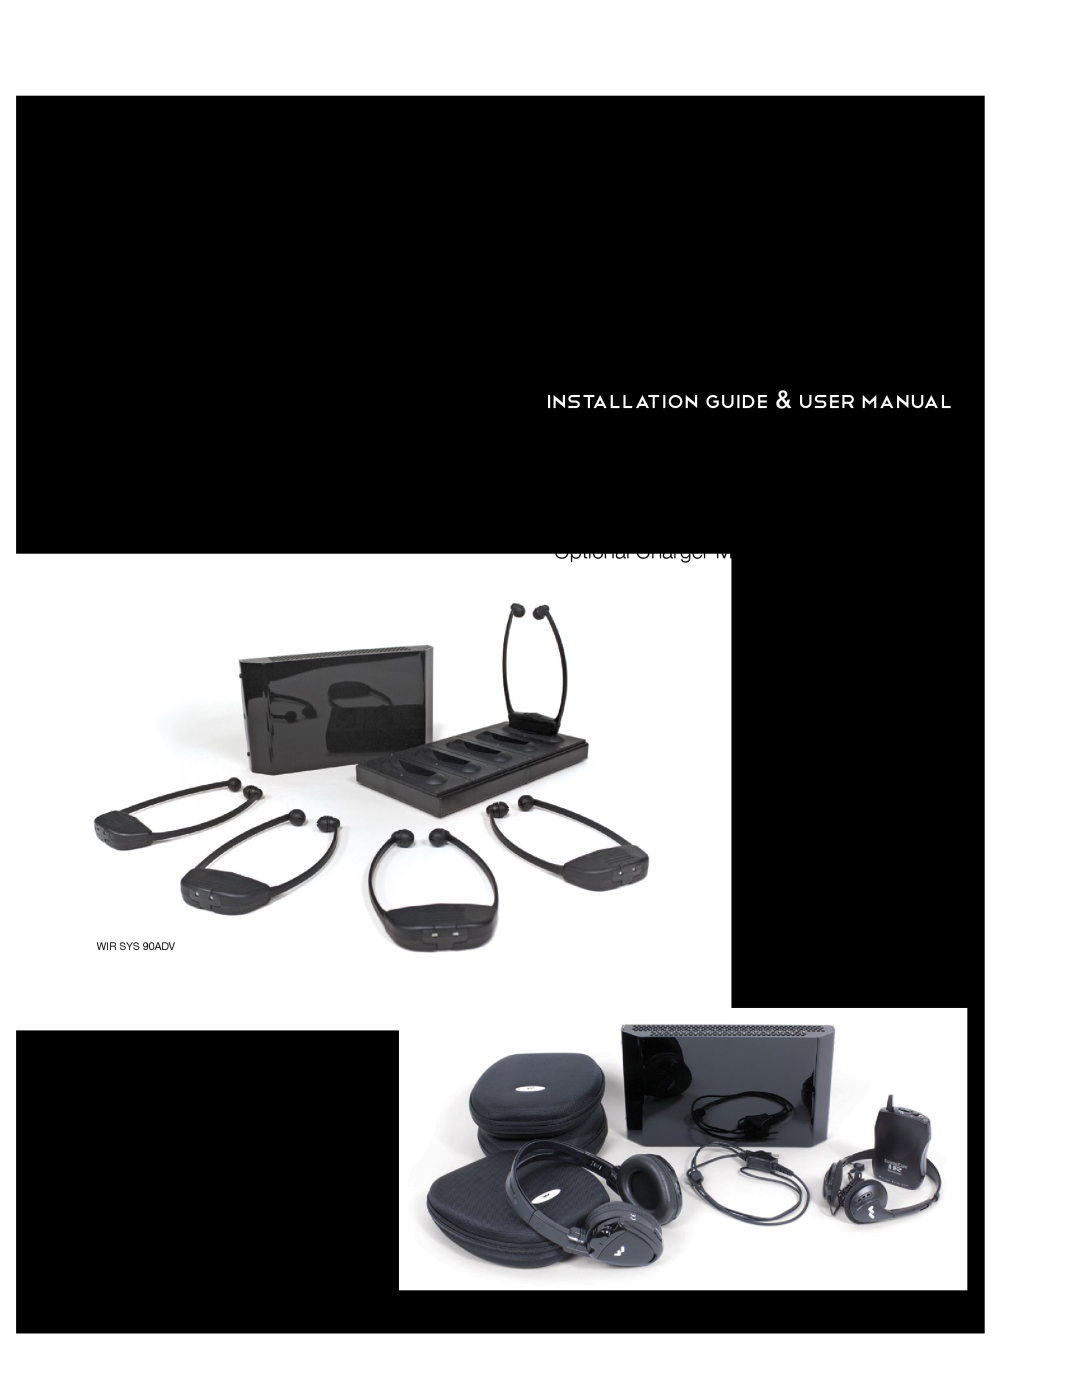 Williams Sound Model WIRTX90, WIRRX22-4 user manual SoundPlus, Infrared Listening System, Installation Guide & User Manual 